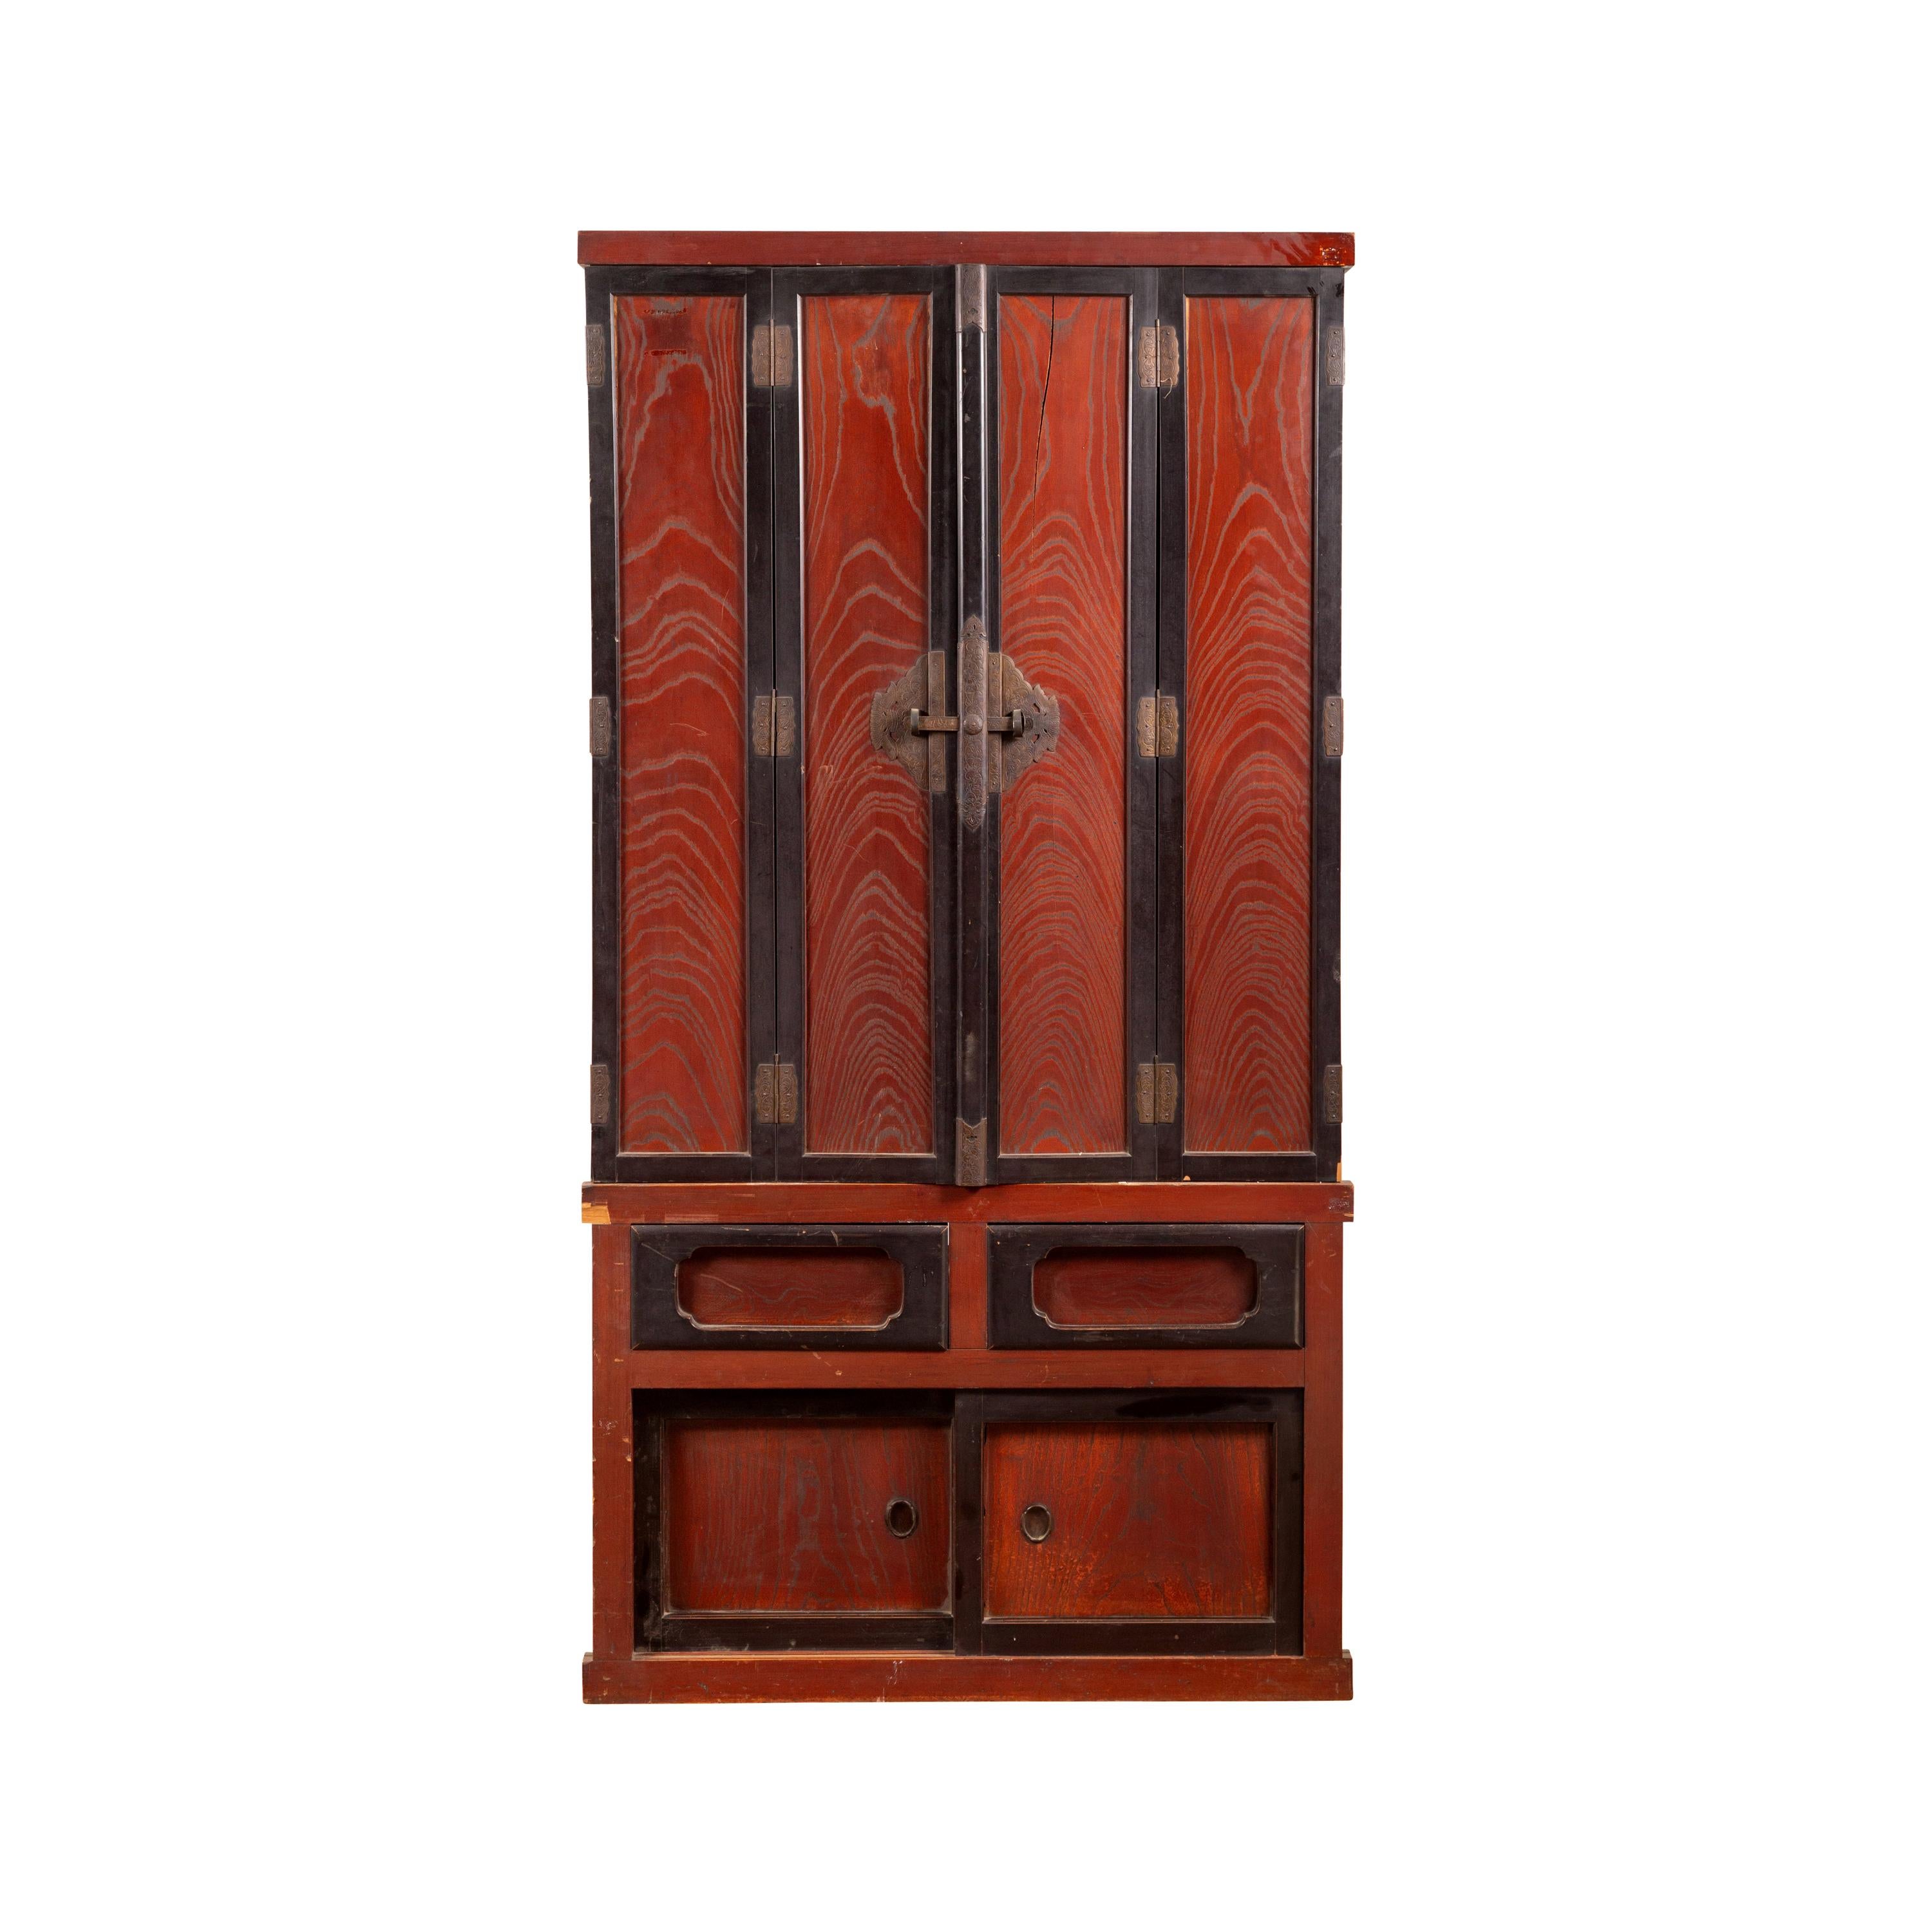 Japanese Meiji Period Late 19th Century Red and Black Altar Shrine Wood Cabinet